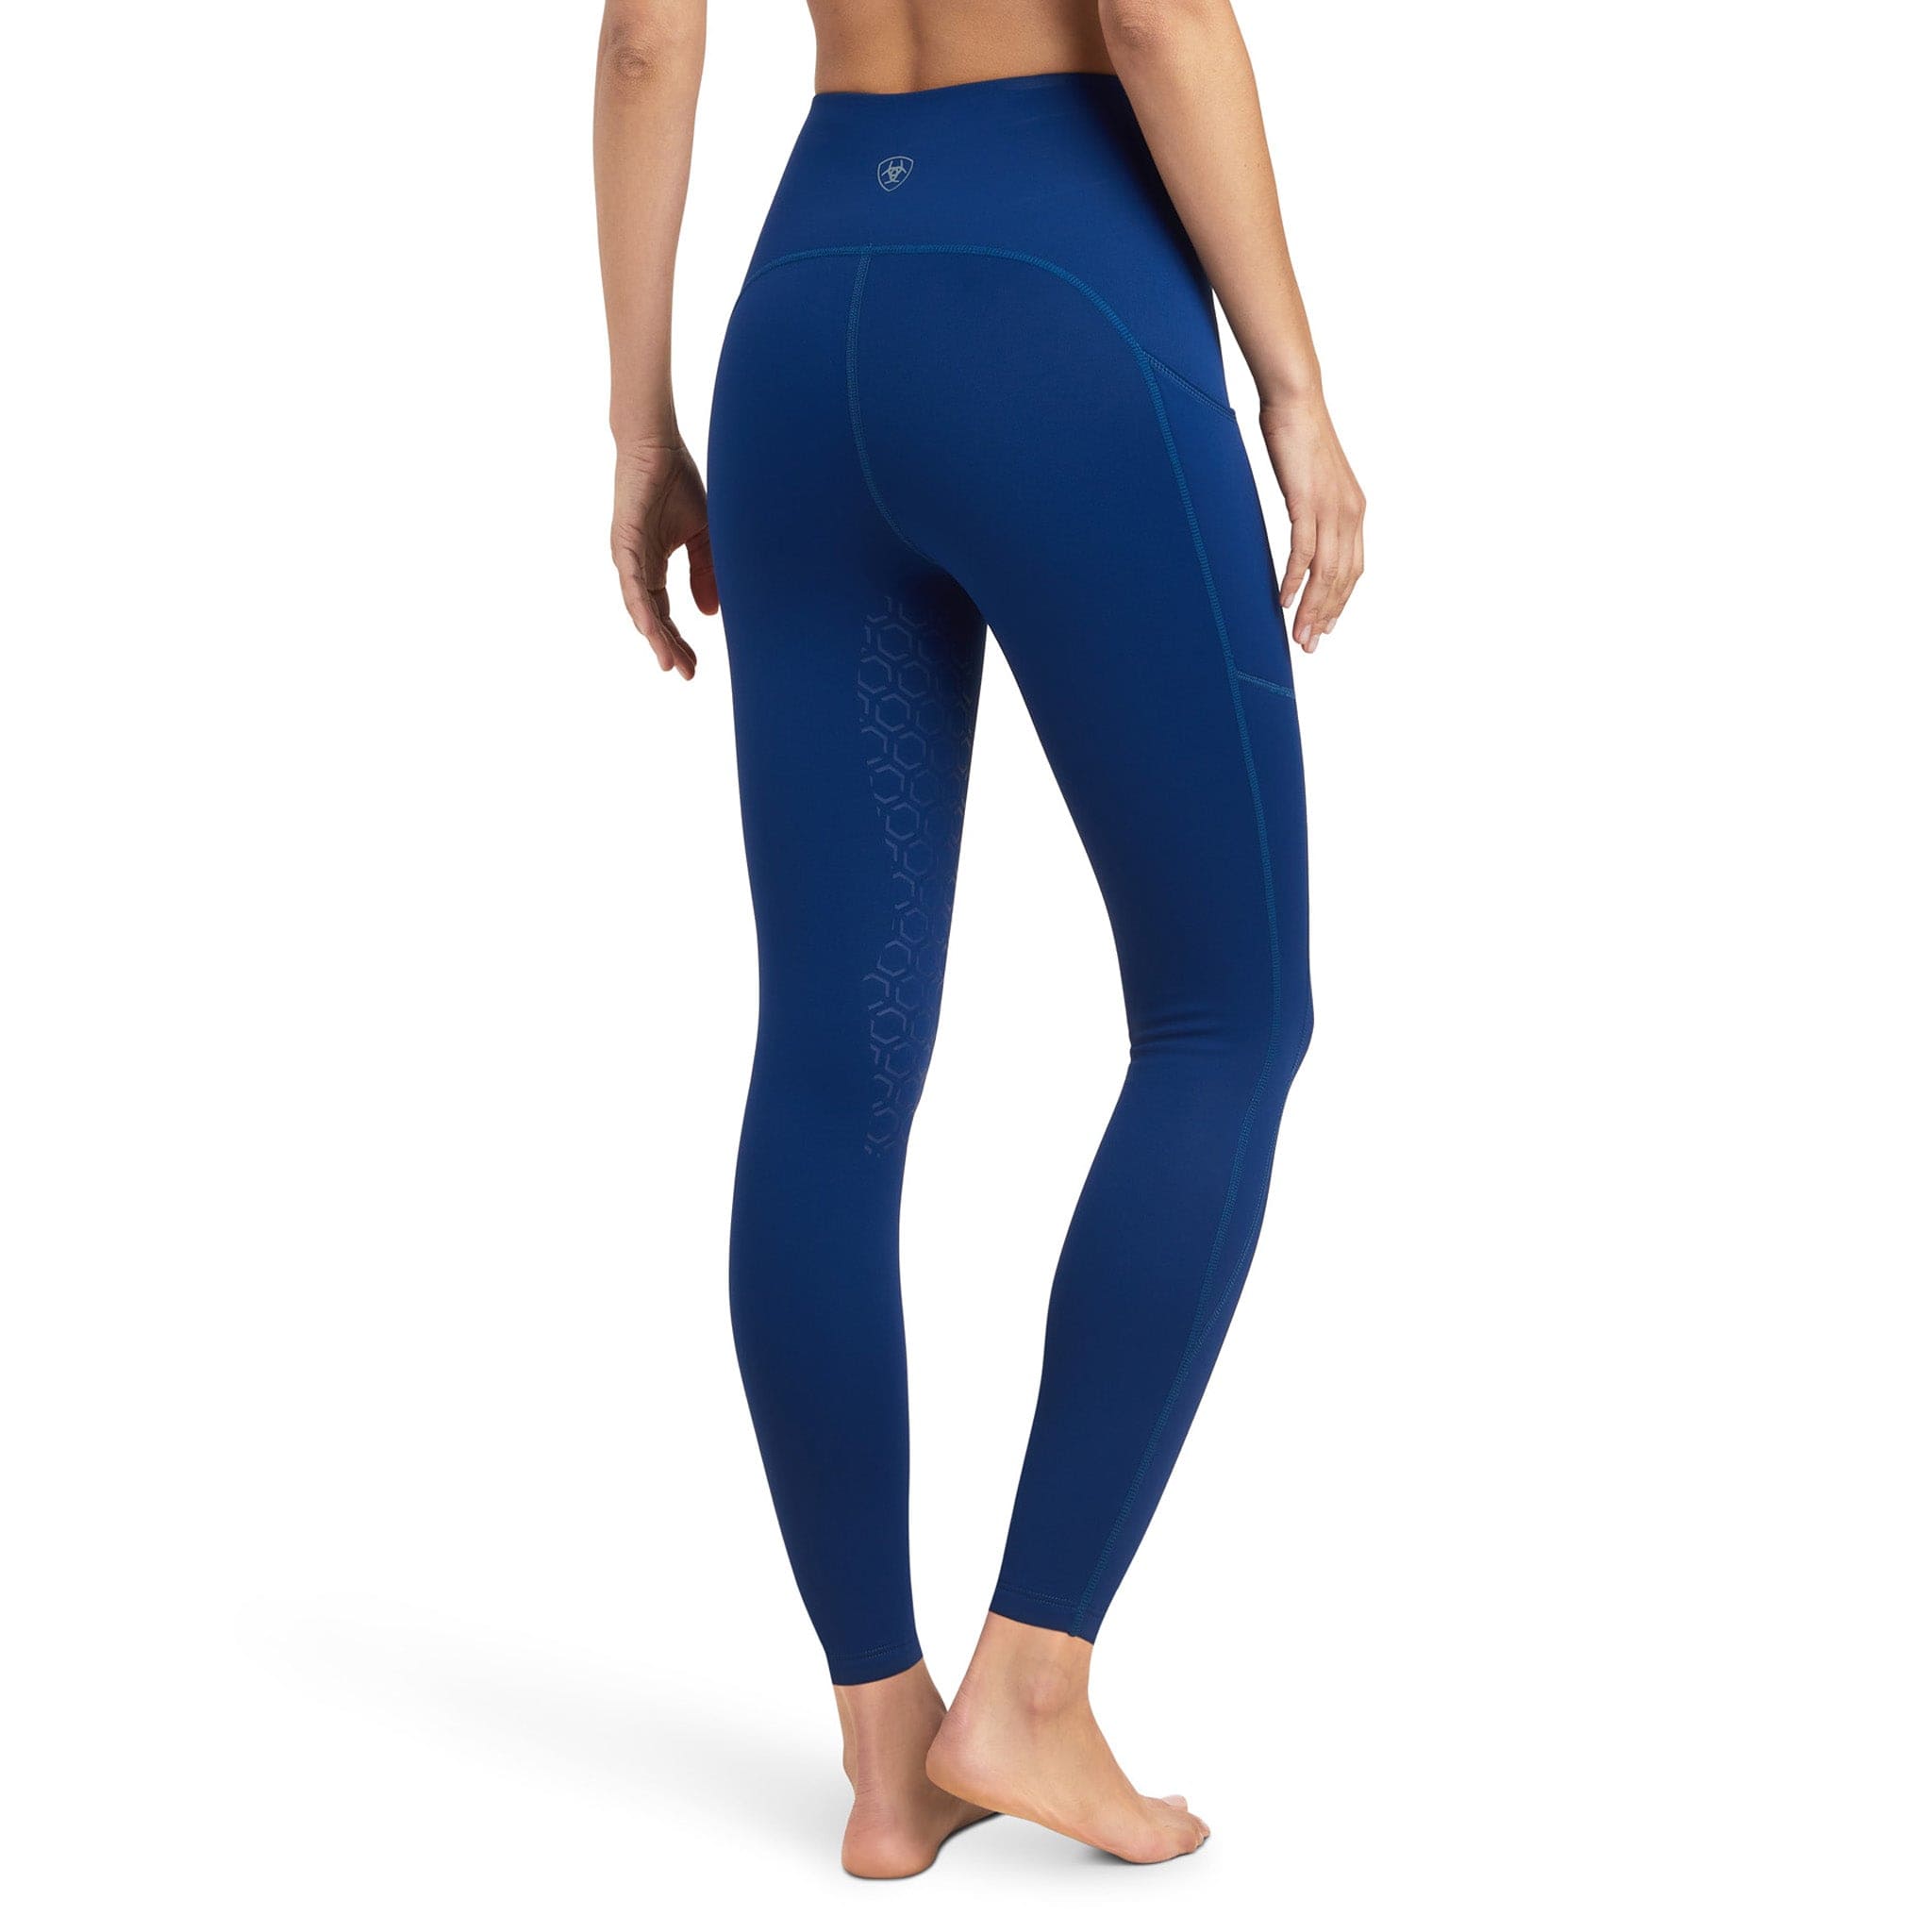 Ariat Venture Thermal Riding Tights